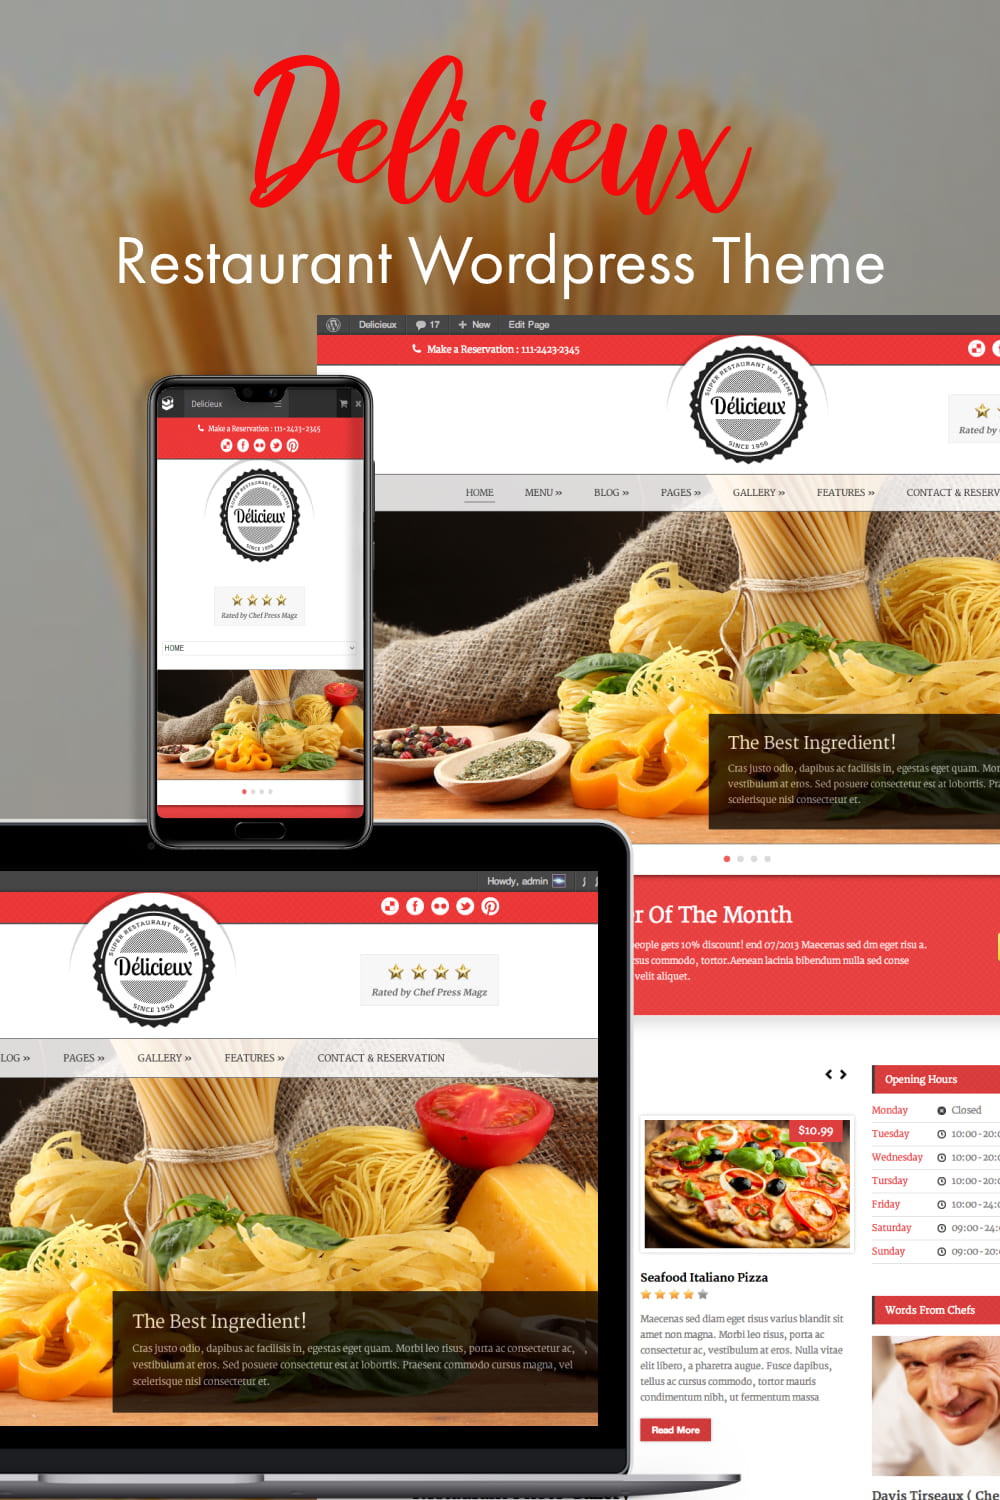 Page image of a colorful restaurant theme WordPress template on various devices.